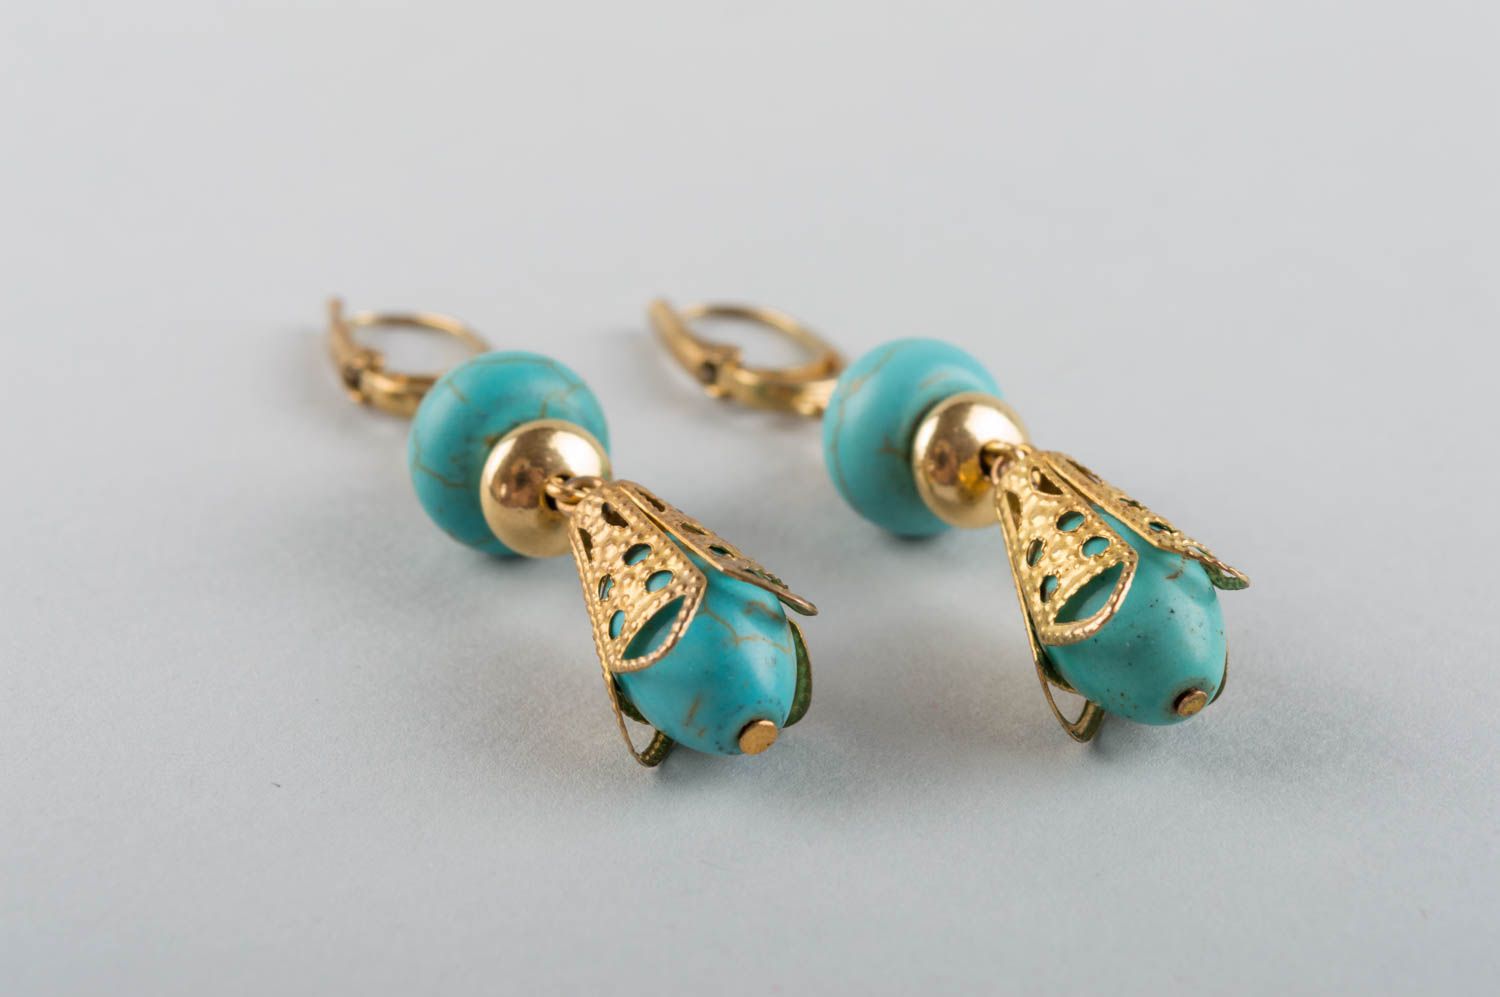 Handmade accessory made of natural stones earrings made of turquoise and brass photo 3